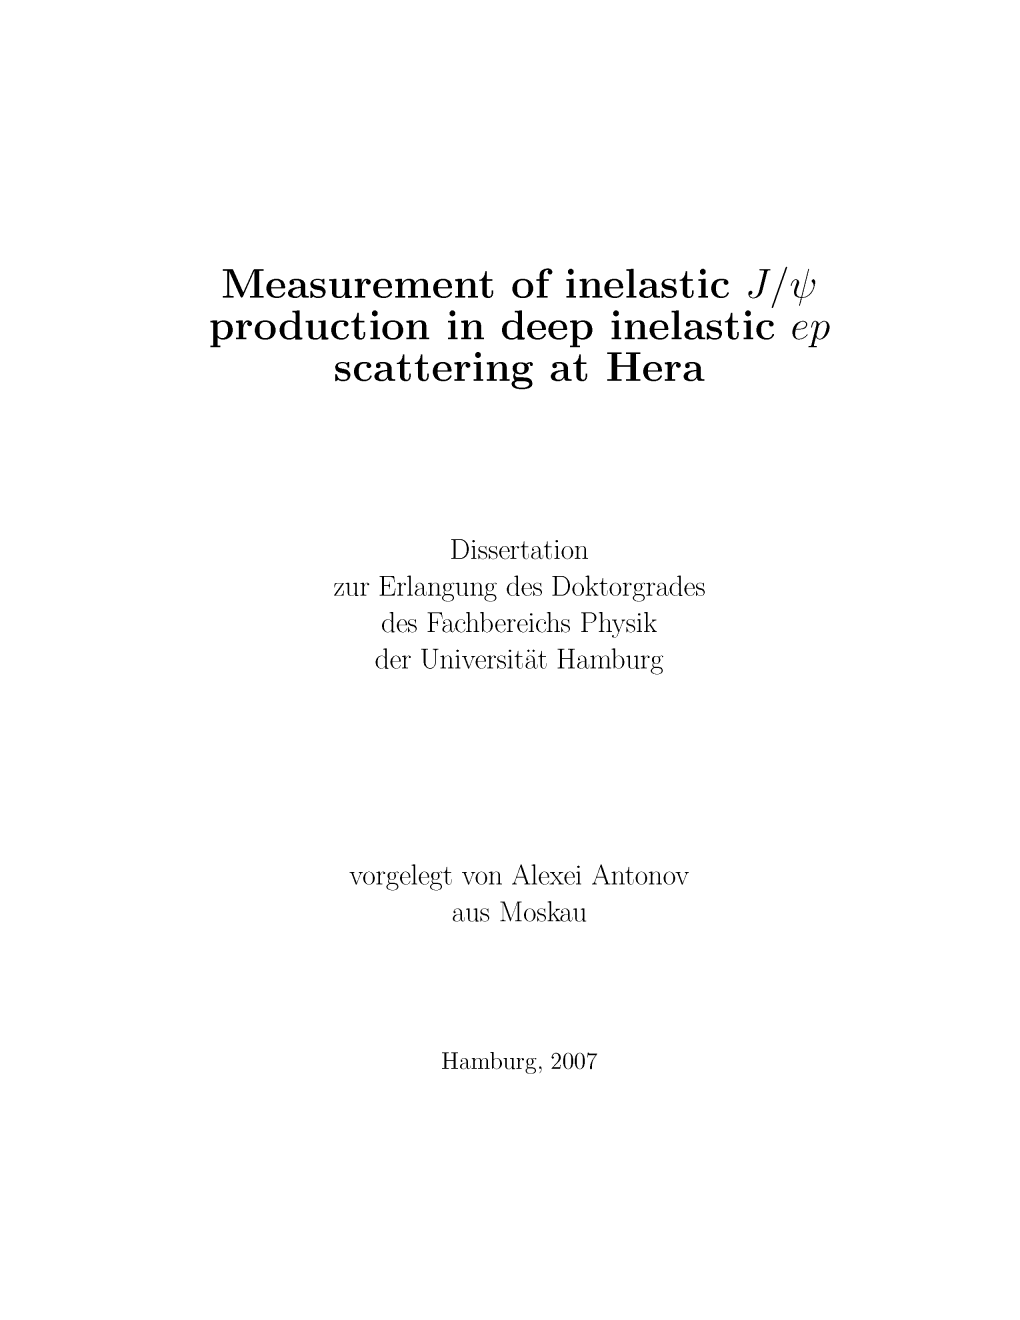 Production in Deep Inelastic Ep Scattering at Hera